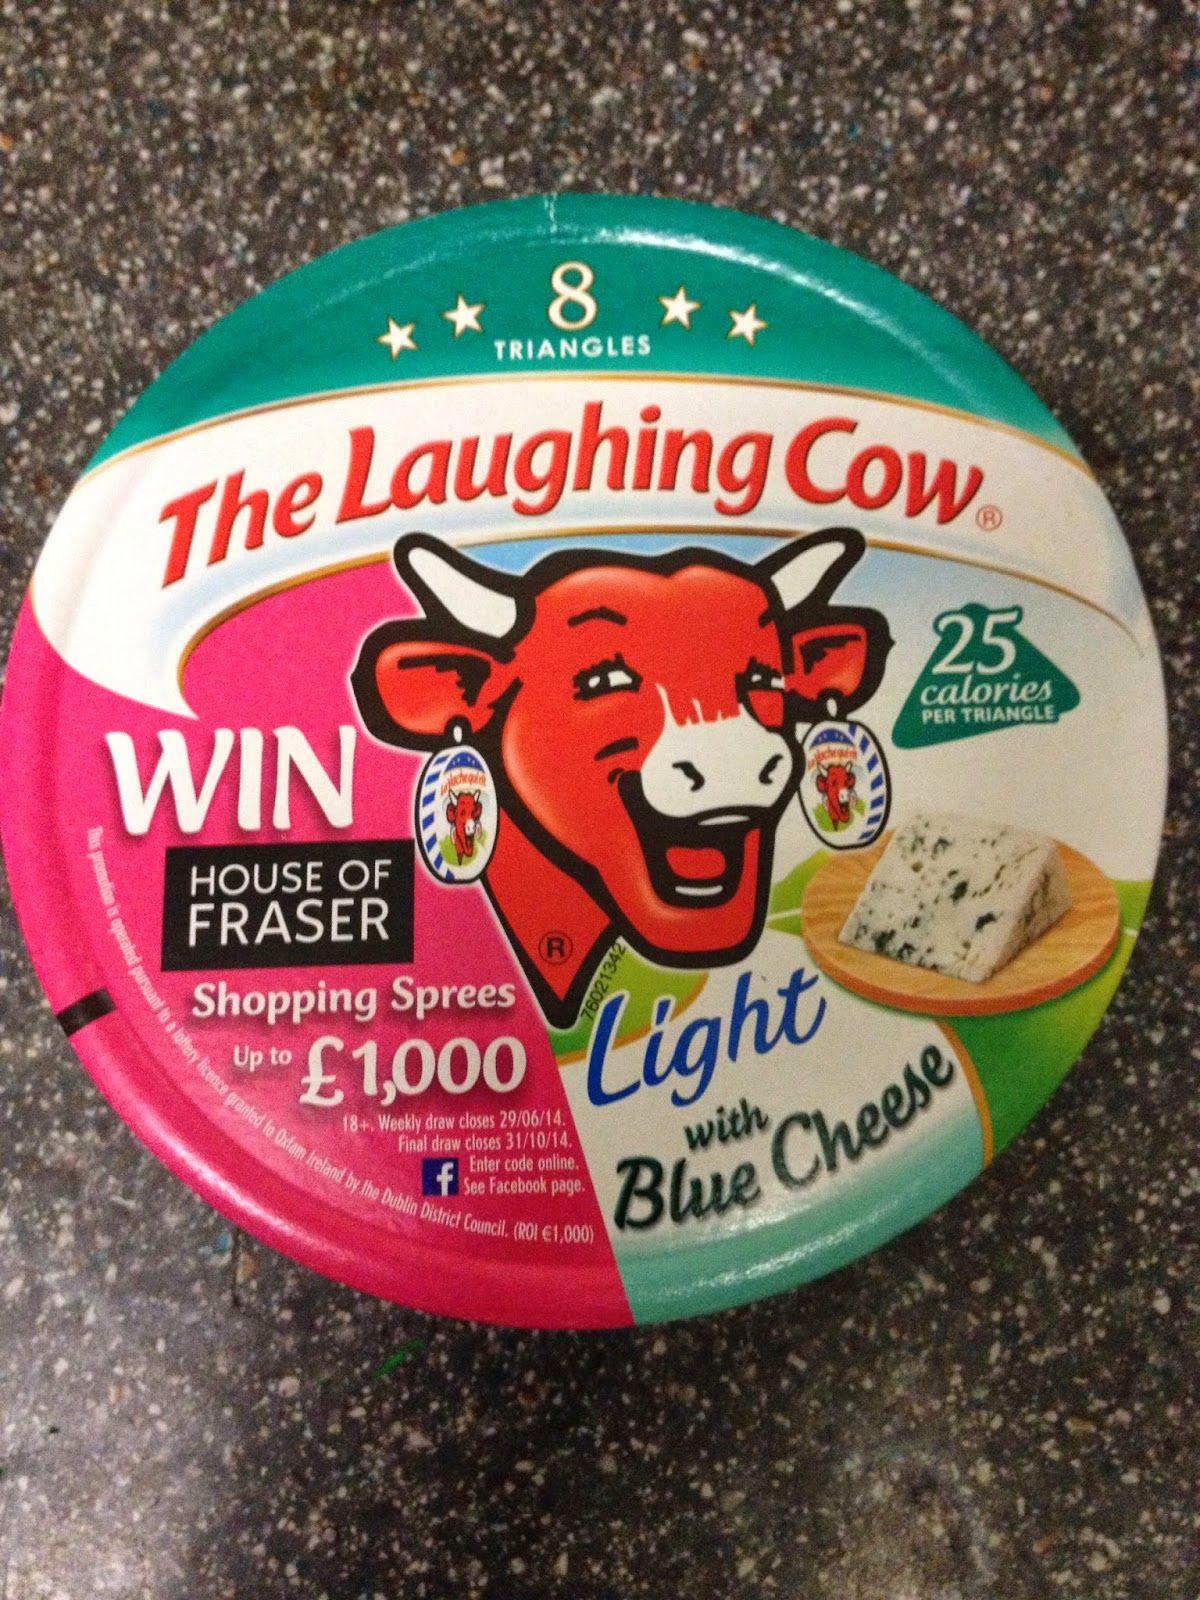 Cow Triangle Logo - A Review A Day: Today's Review: The Laughing Cow Triangles With Blue ...